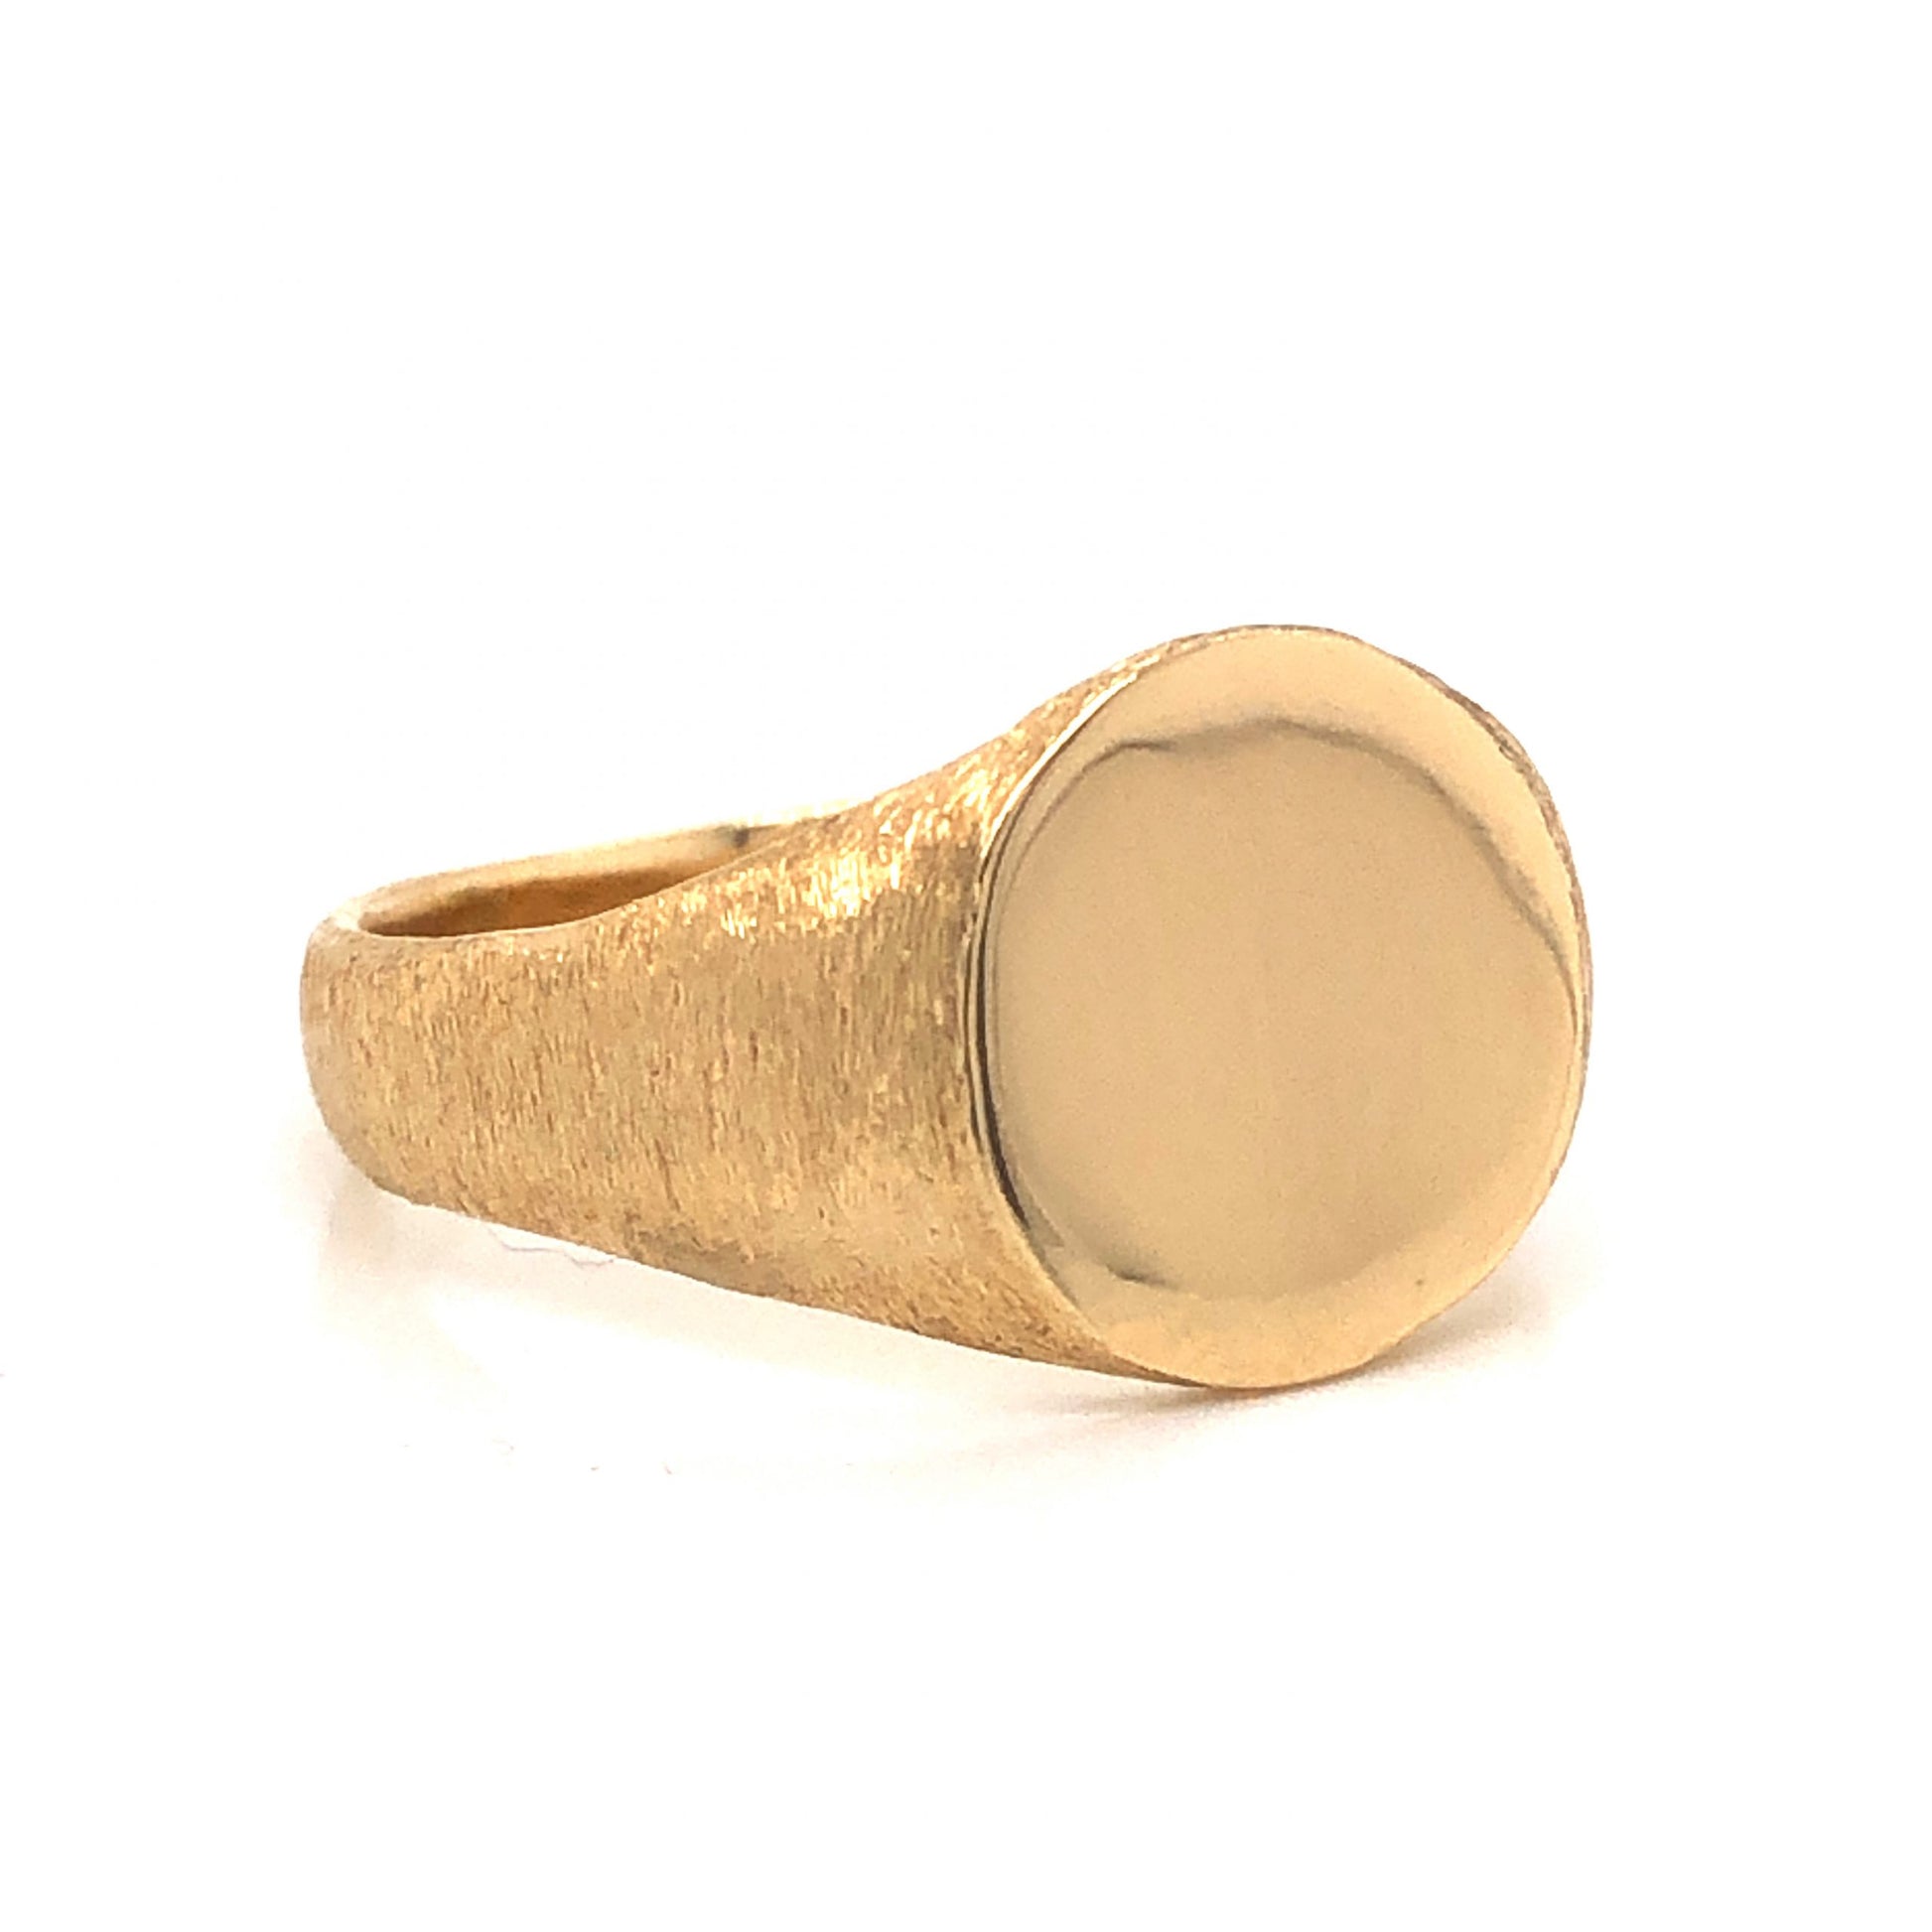 Mid-Century Round Signet Ring in 14k Yellow GoldComposition: 14 Karat Yellow Gold Ring Size: 8 Total Gram Weight: 5.0 g